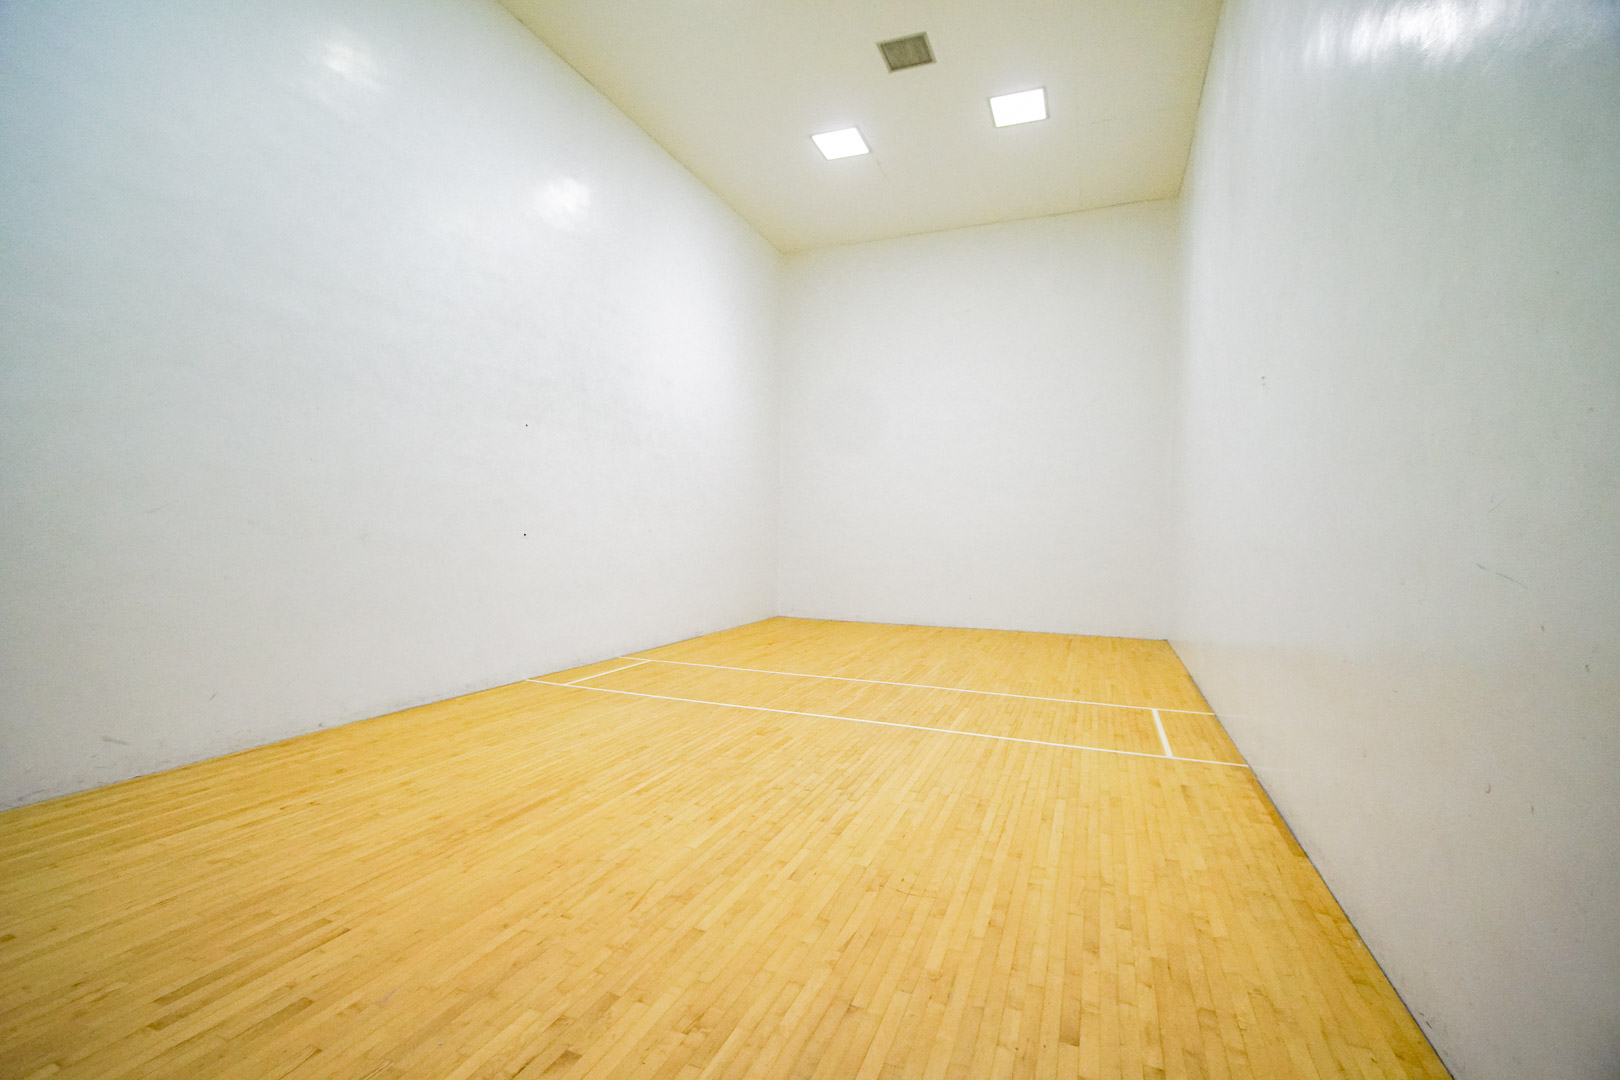 Indoor racquetball ball courts available at VRI's Brewster Green Resort in Massachusetts.